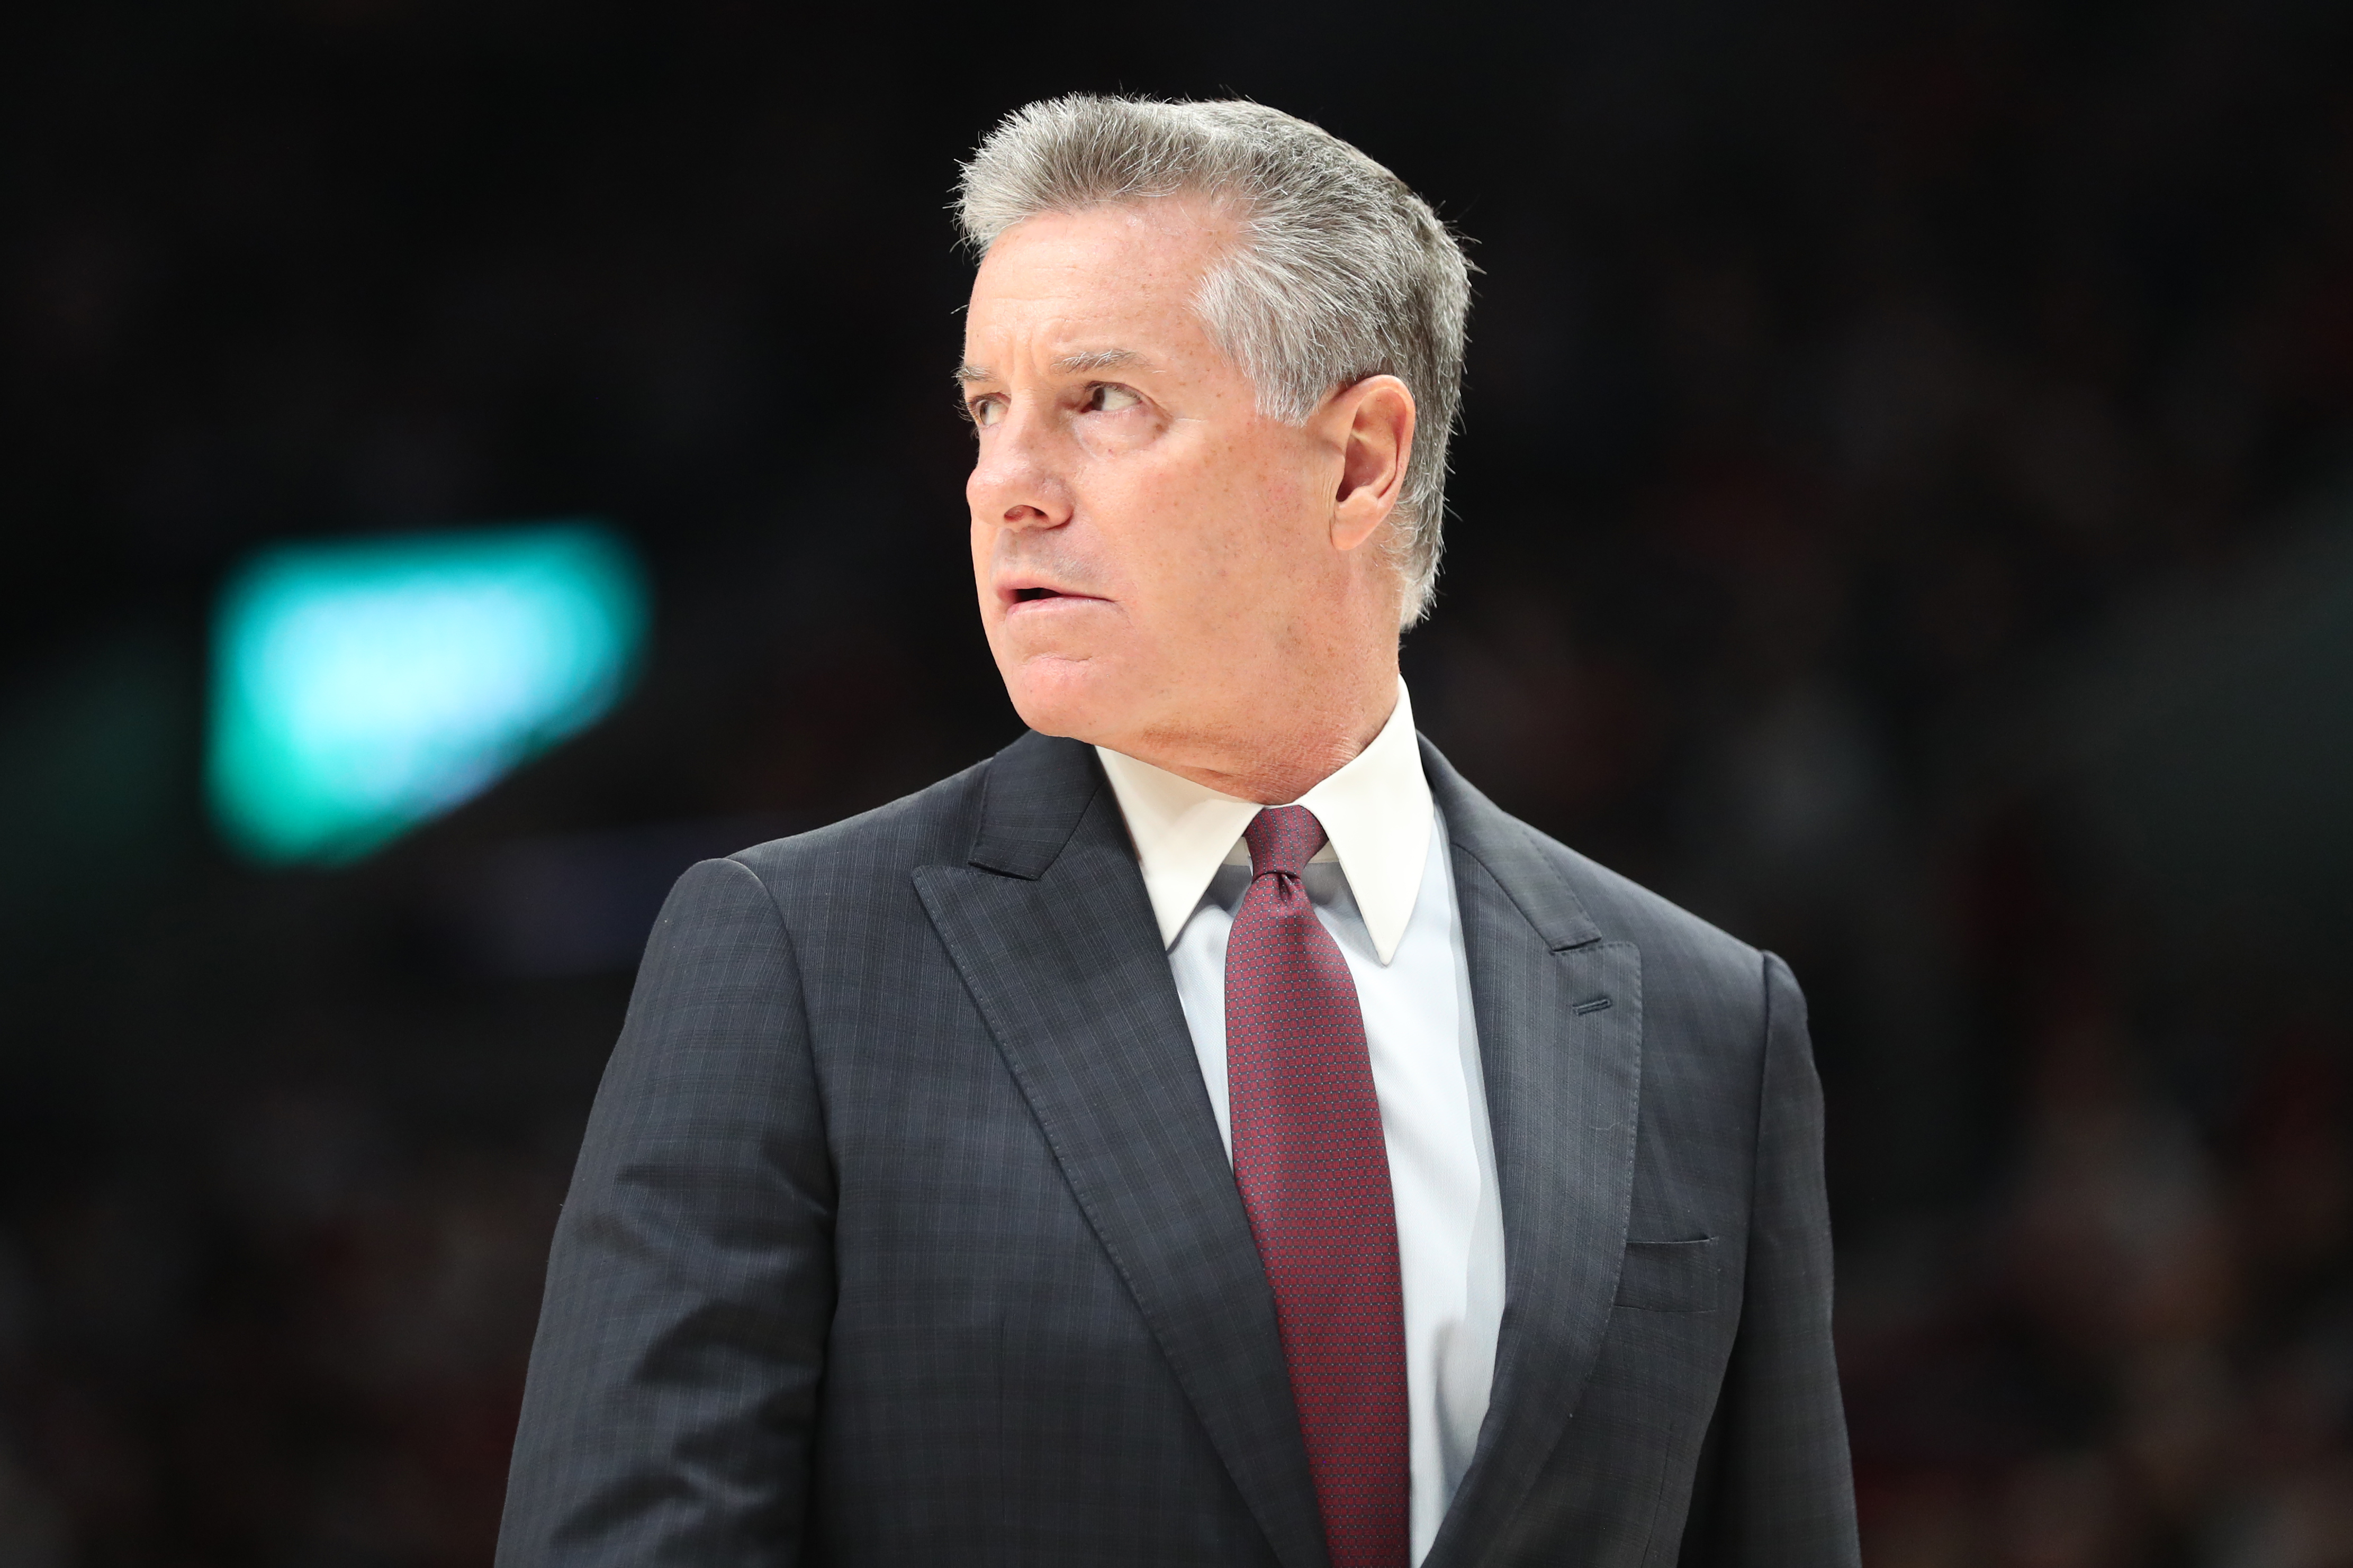 Neil Olshey Fired as Blazers GM After Probe into Bullying, Intimidation Allegations